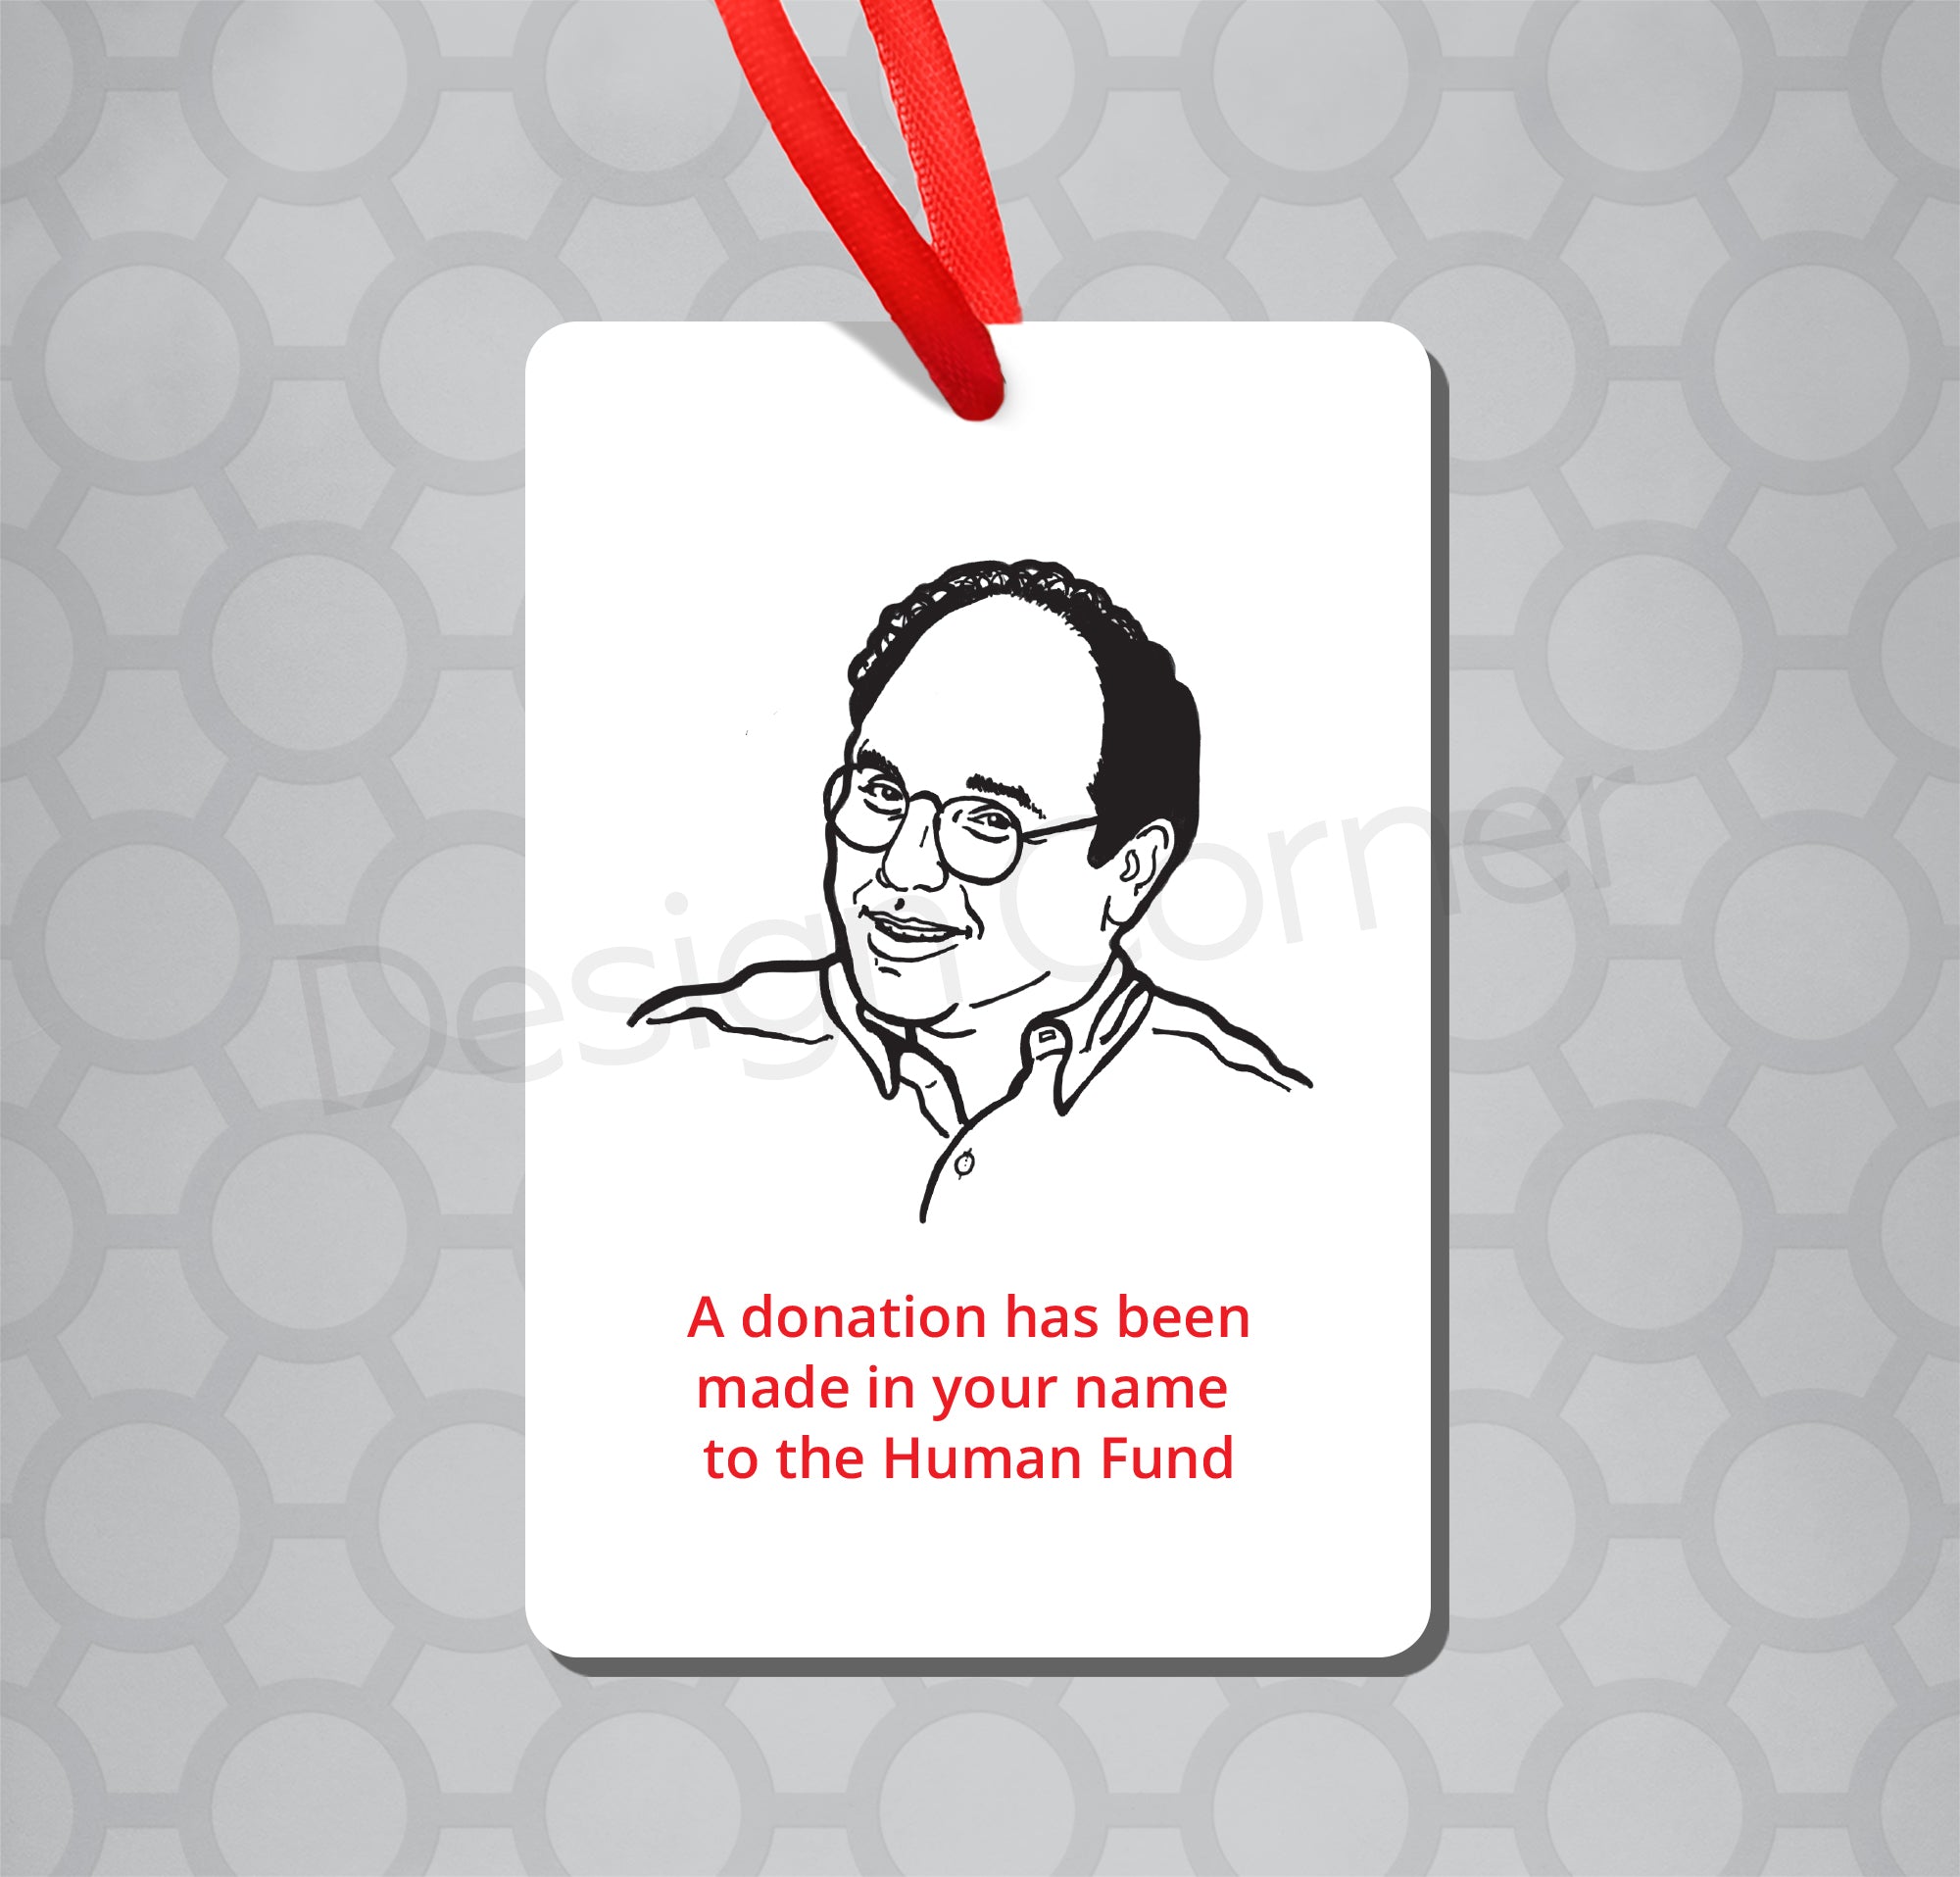 Illustration of Seinfeld George Costanza on Magnet ornament. Caption says "A donation has been made in your name to the Human Fund."